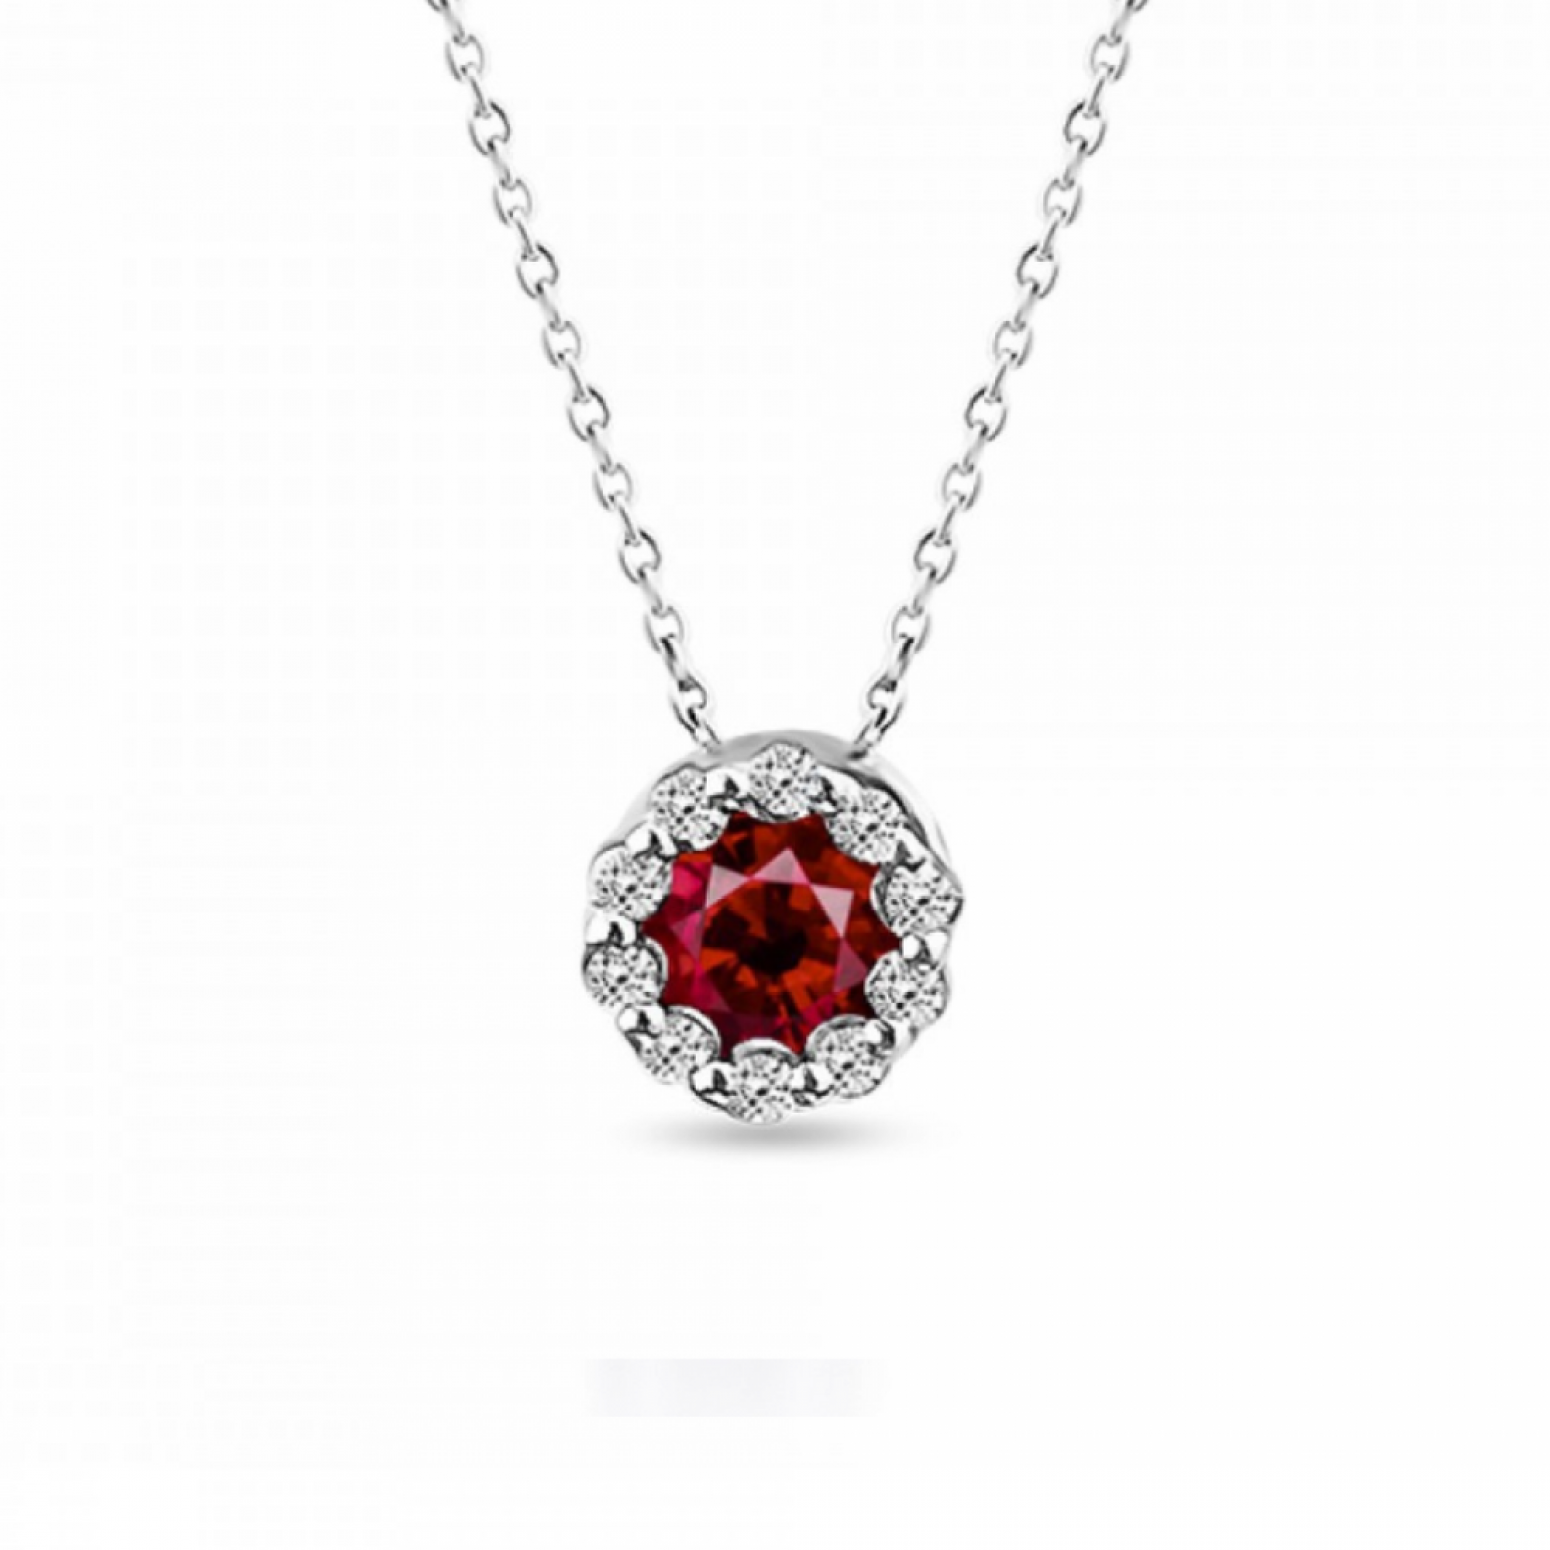 Solitaire rosette necklace, Κ18 white gold with ruby 0.30ct and diamond 0.06ct, VS1, G, me2268 NECKLACES Κοσμηματα - chrilia.gr